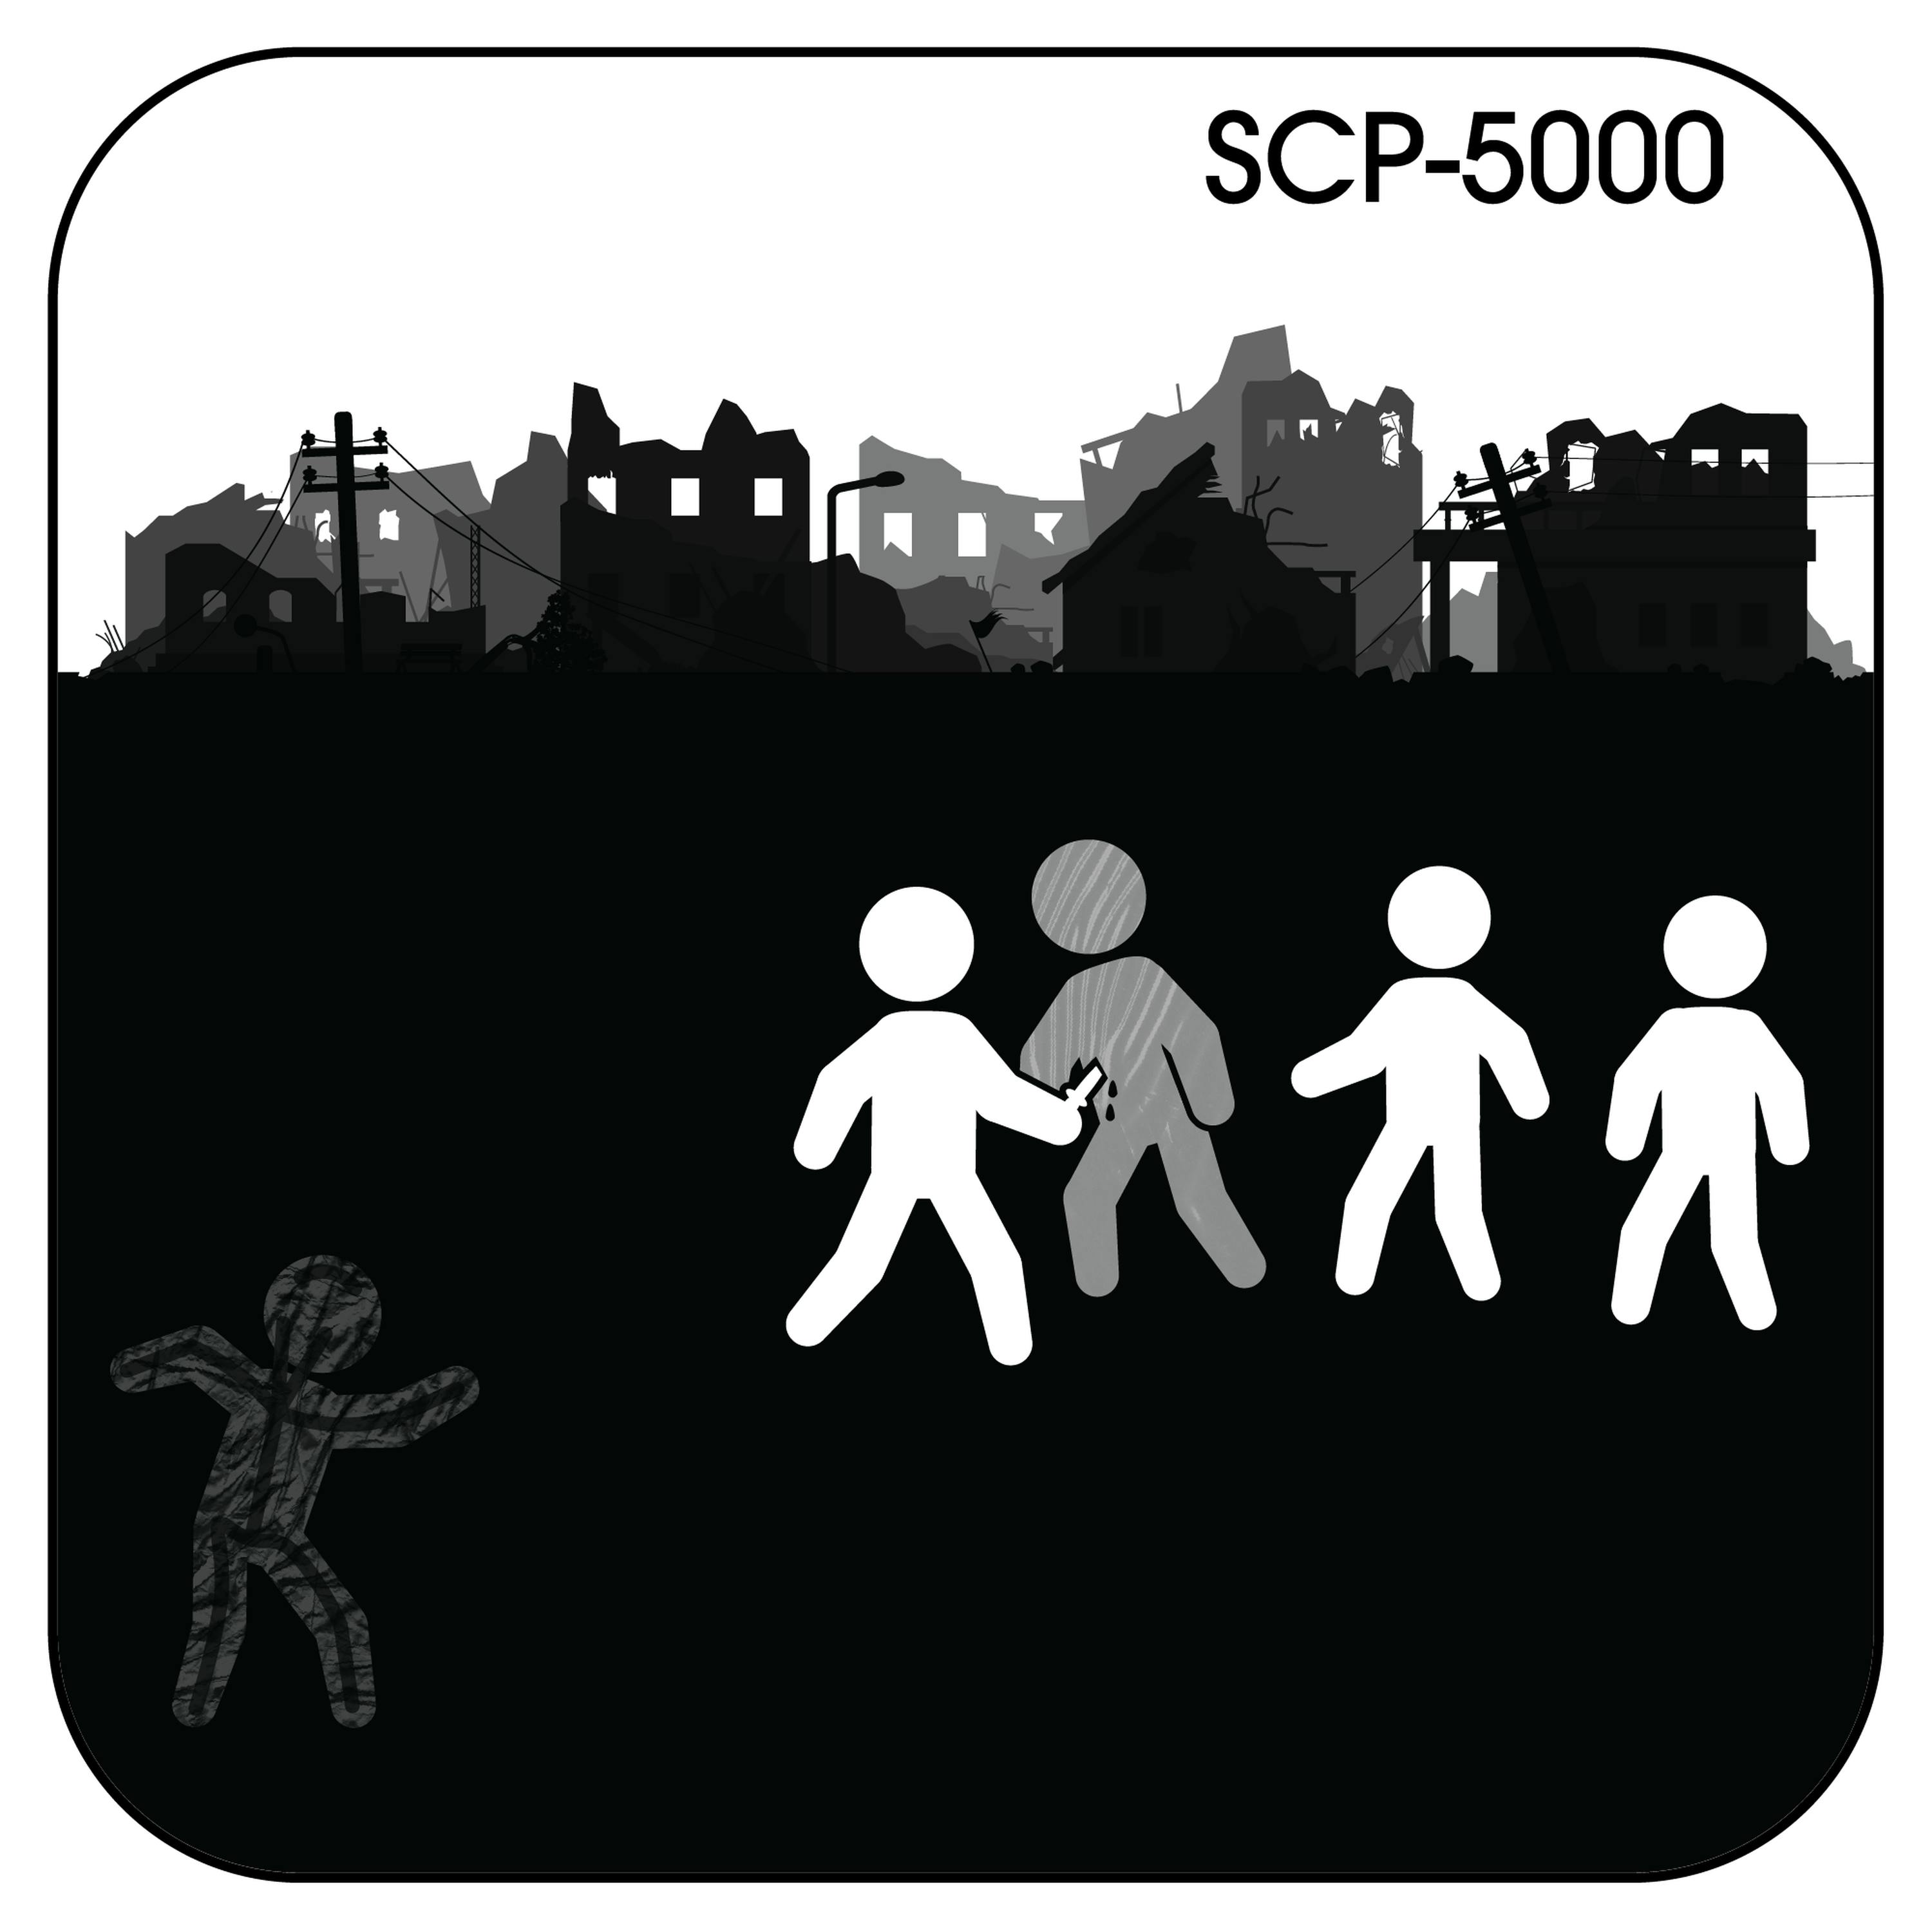 SCP-5000: ”Why?”